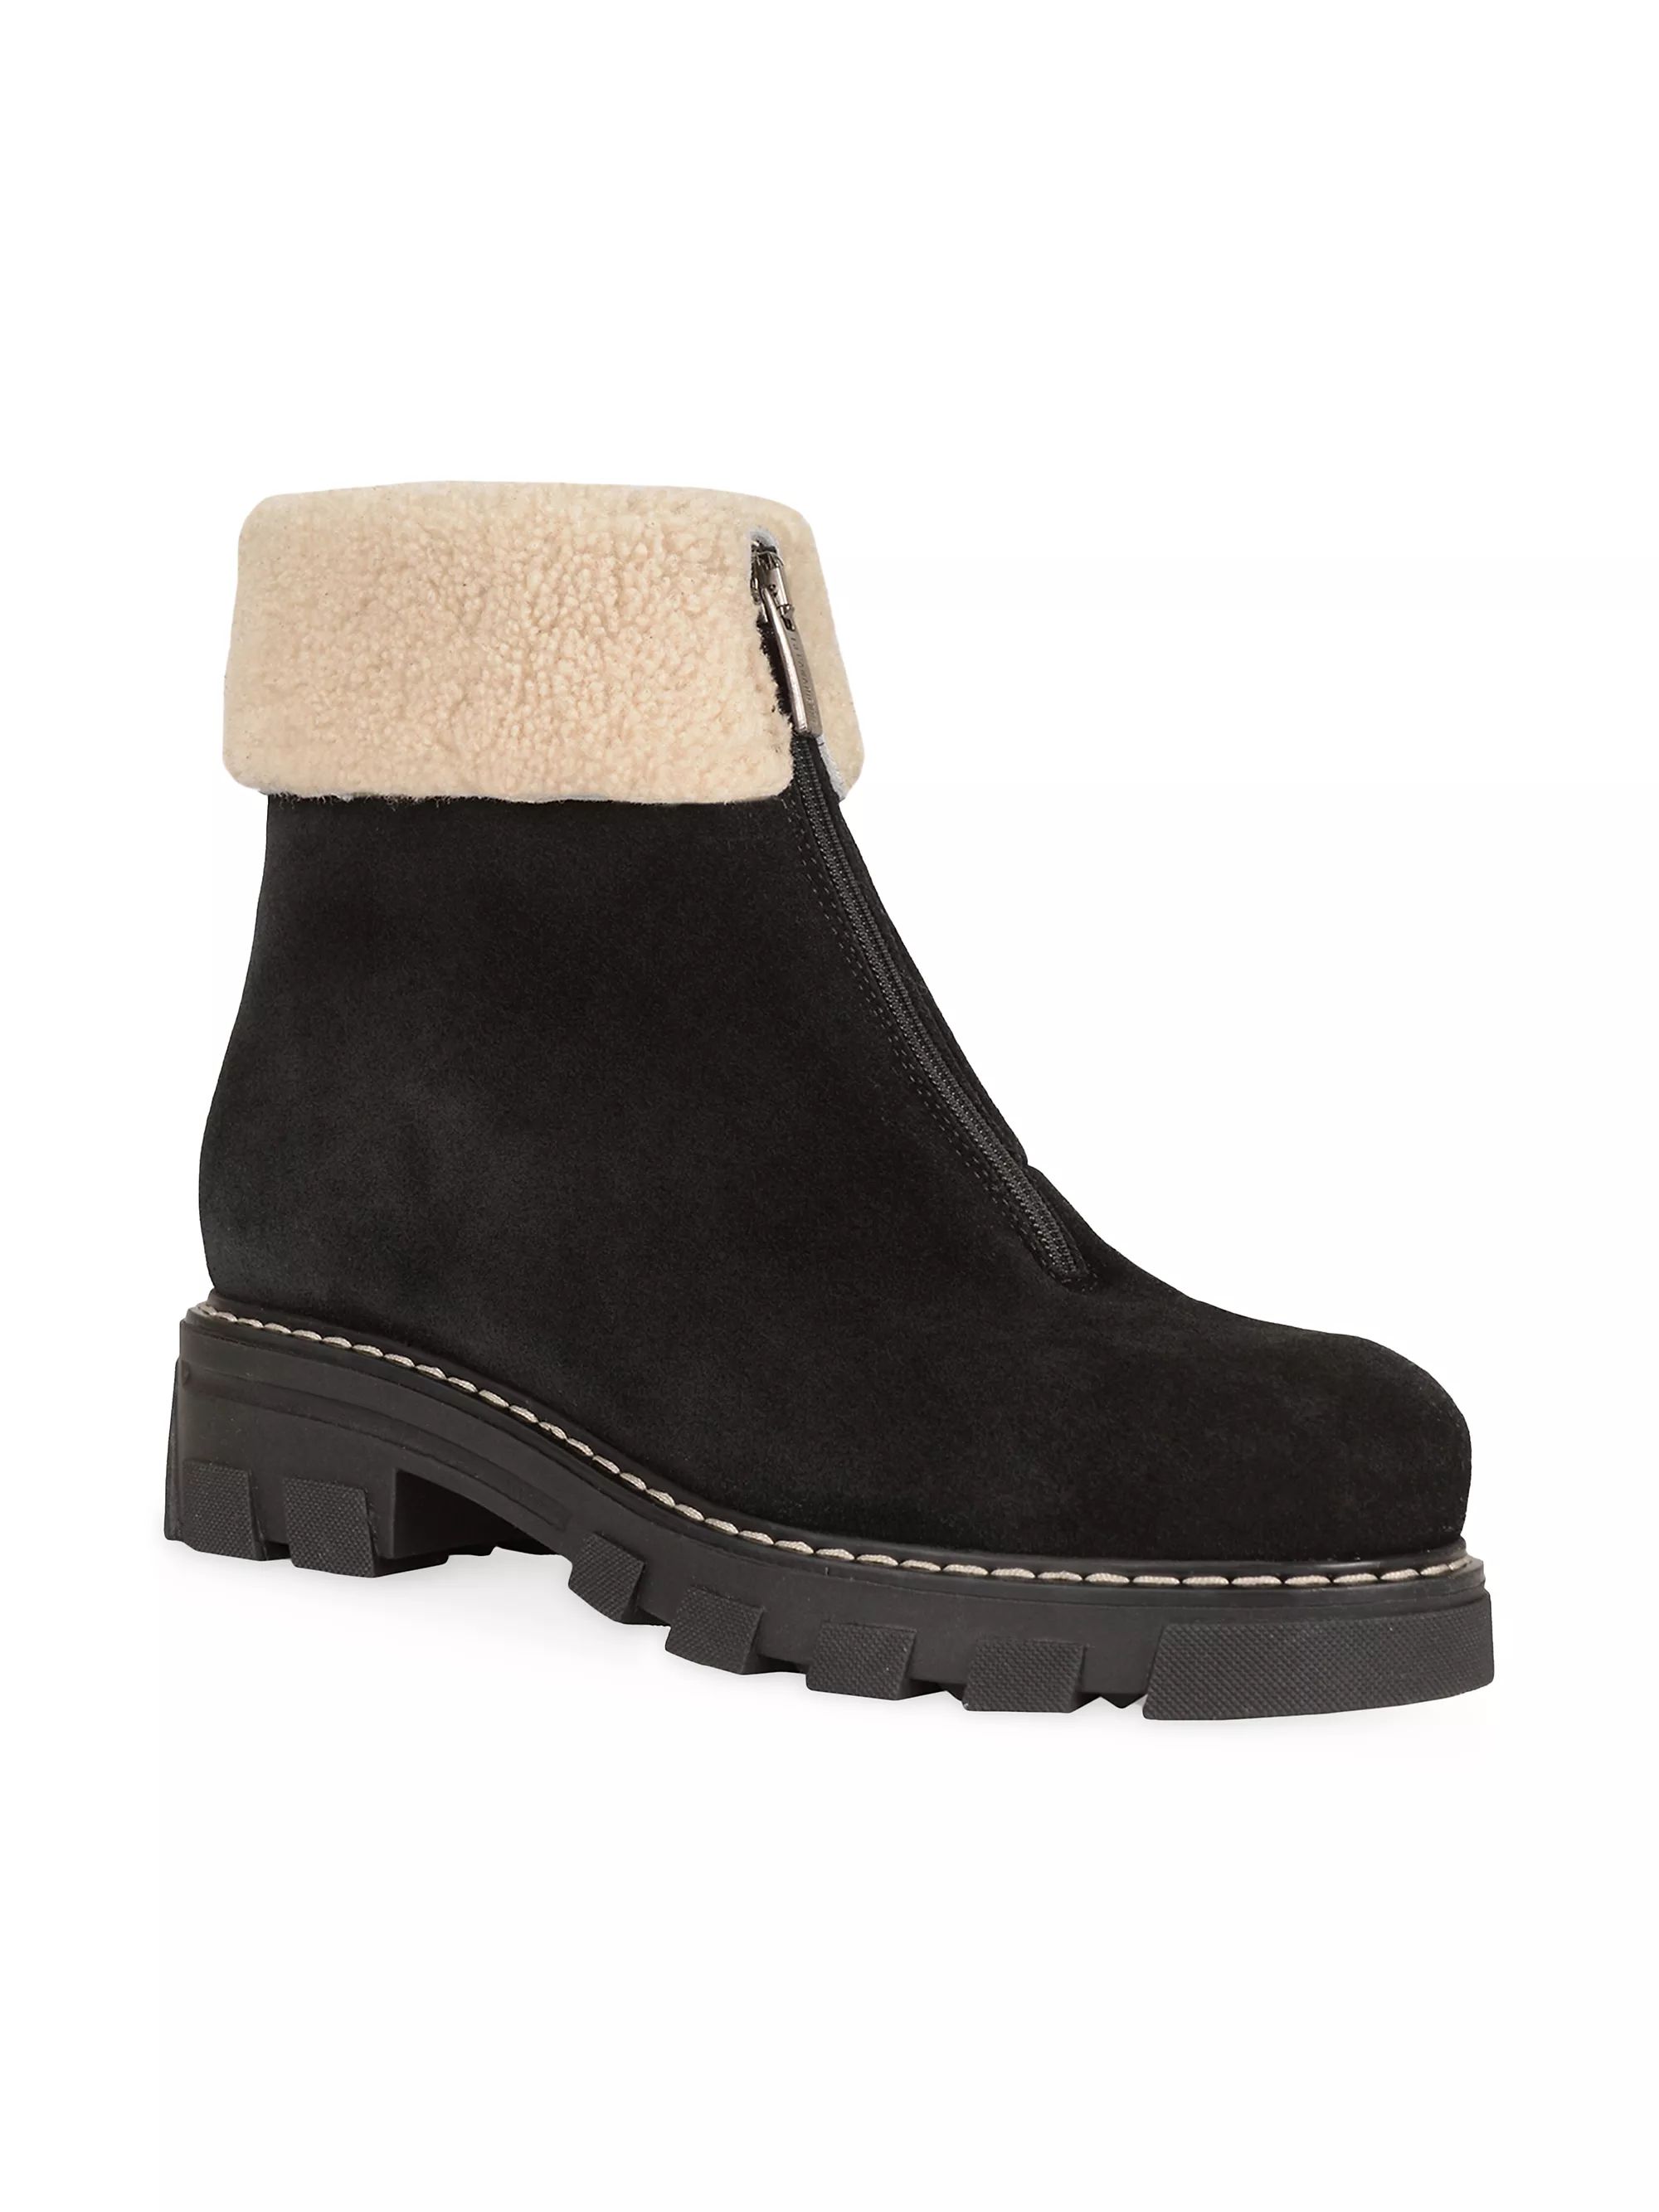 Abba 38MM Suede & Shearling Lug-Sole Boots | Saks Fifth Avenue